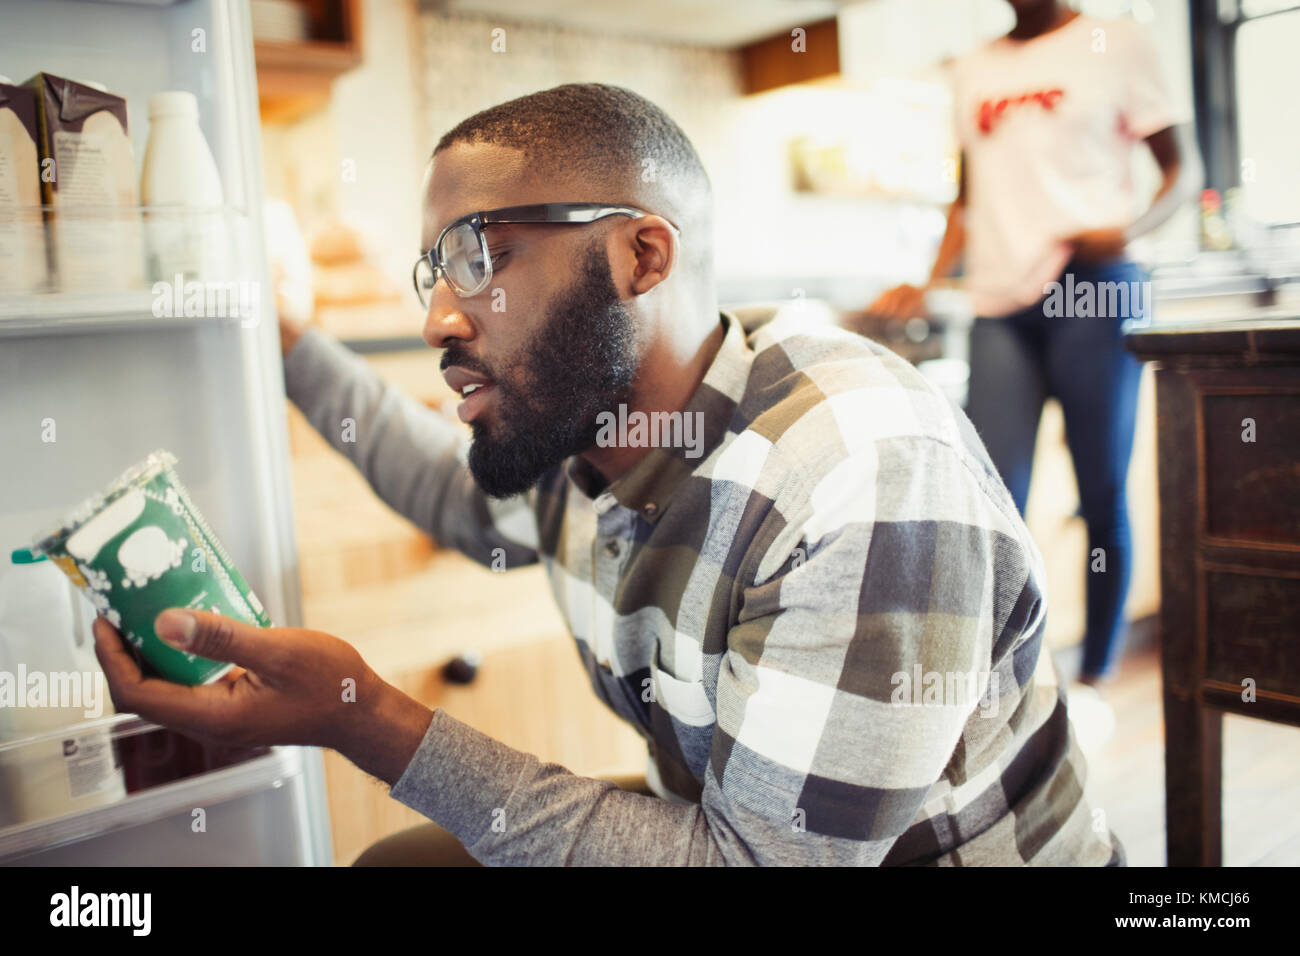 Young man reading label on container at refrigerator Stock Photo